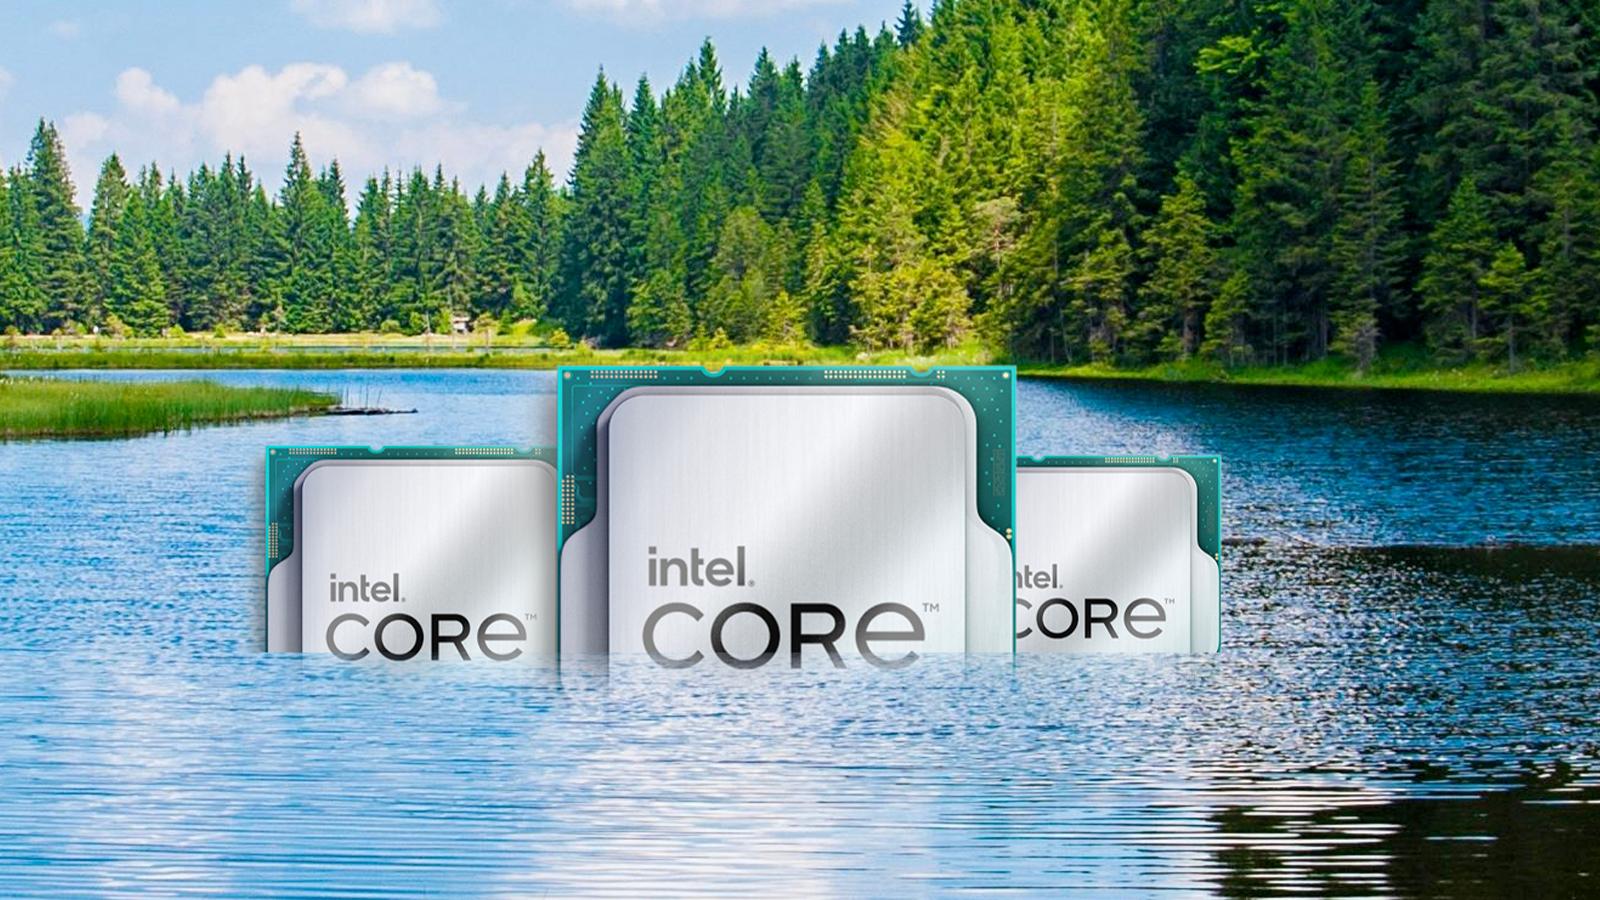 intel arrow lake represeted by a stock image of a lake and intel chips coming out of it